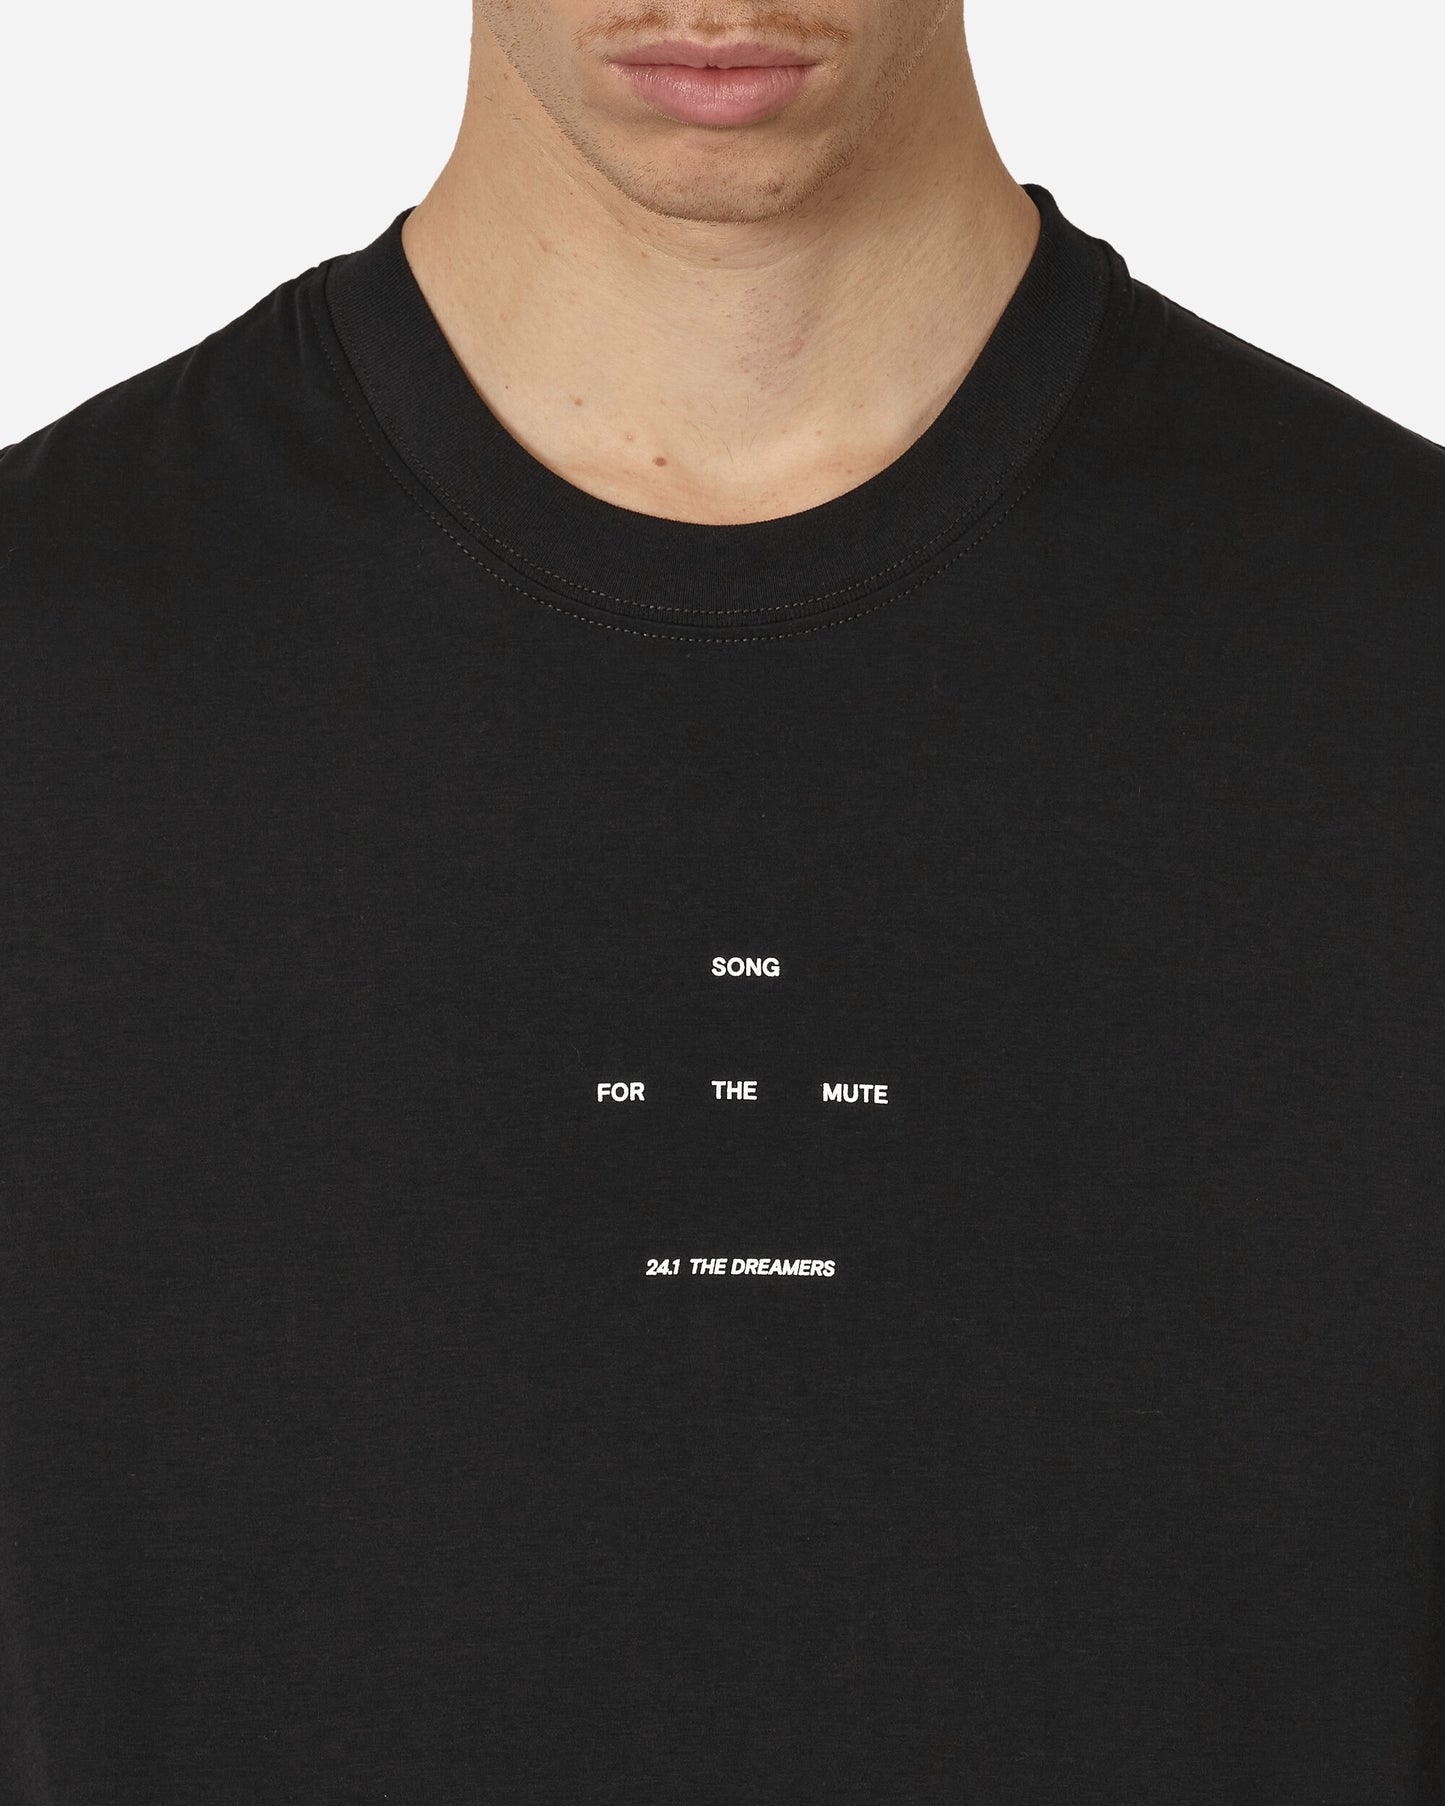 Song for the Mute "Logo" Oversized Tee Black T-Shirts Shortsleeve 241-MTS018P1 LUXEBLK